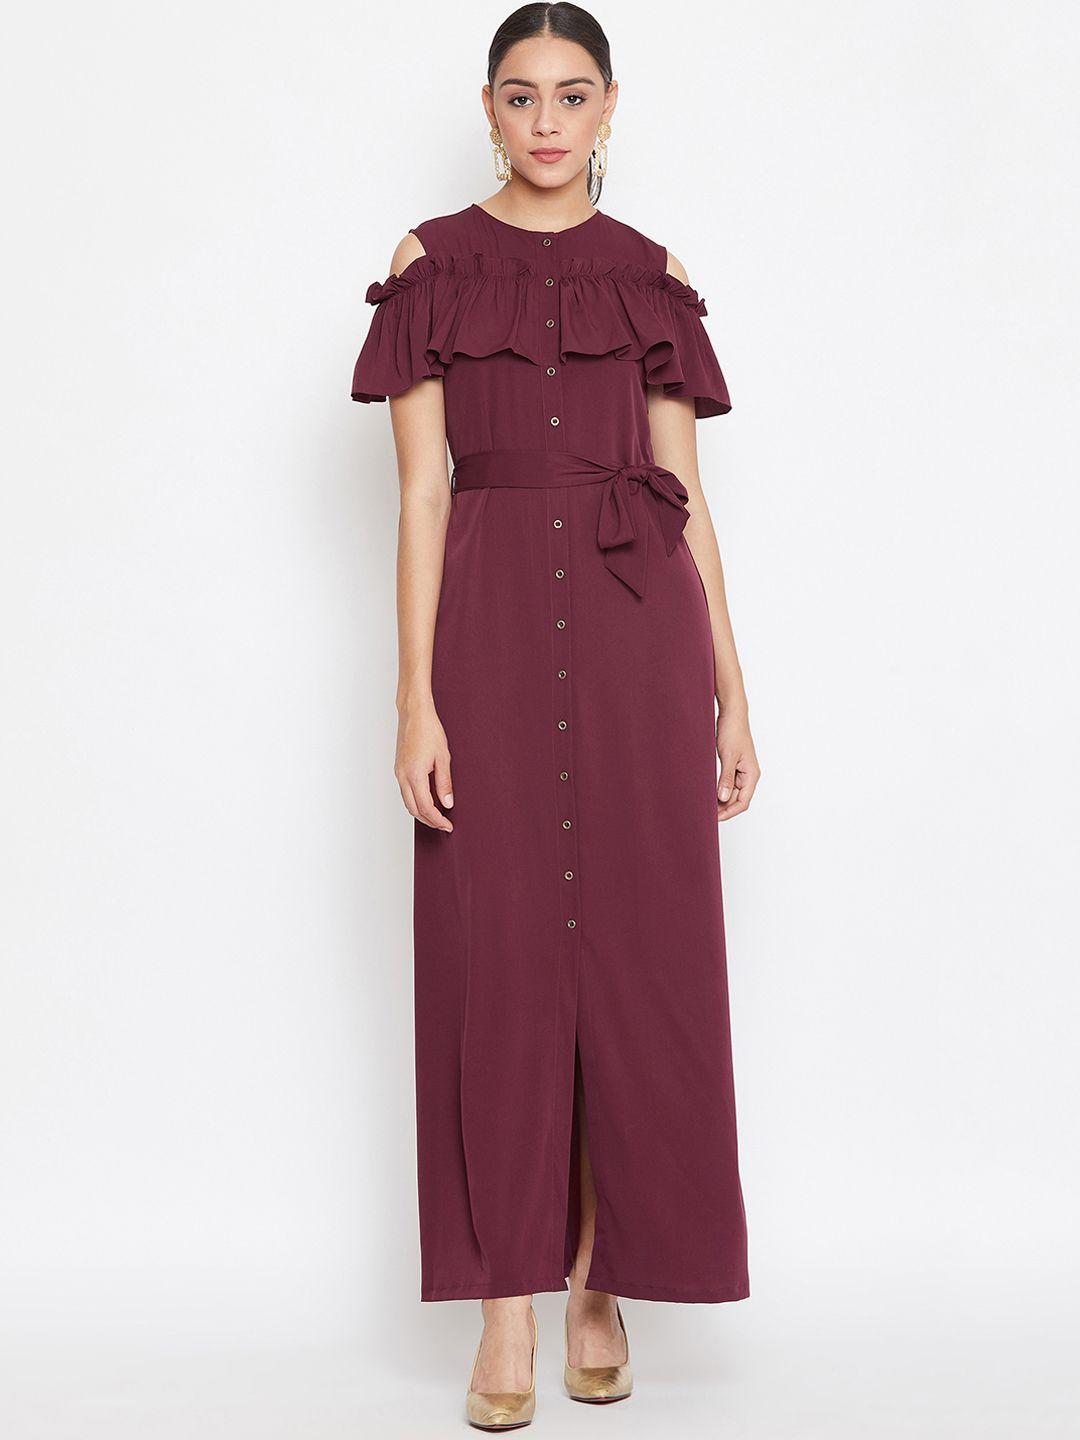 uptownie-lite-women-maroon-solid-ruffle-maxi-dress-with-cold-shoulder-sleeves